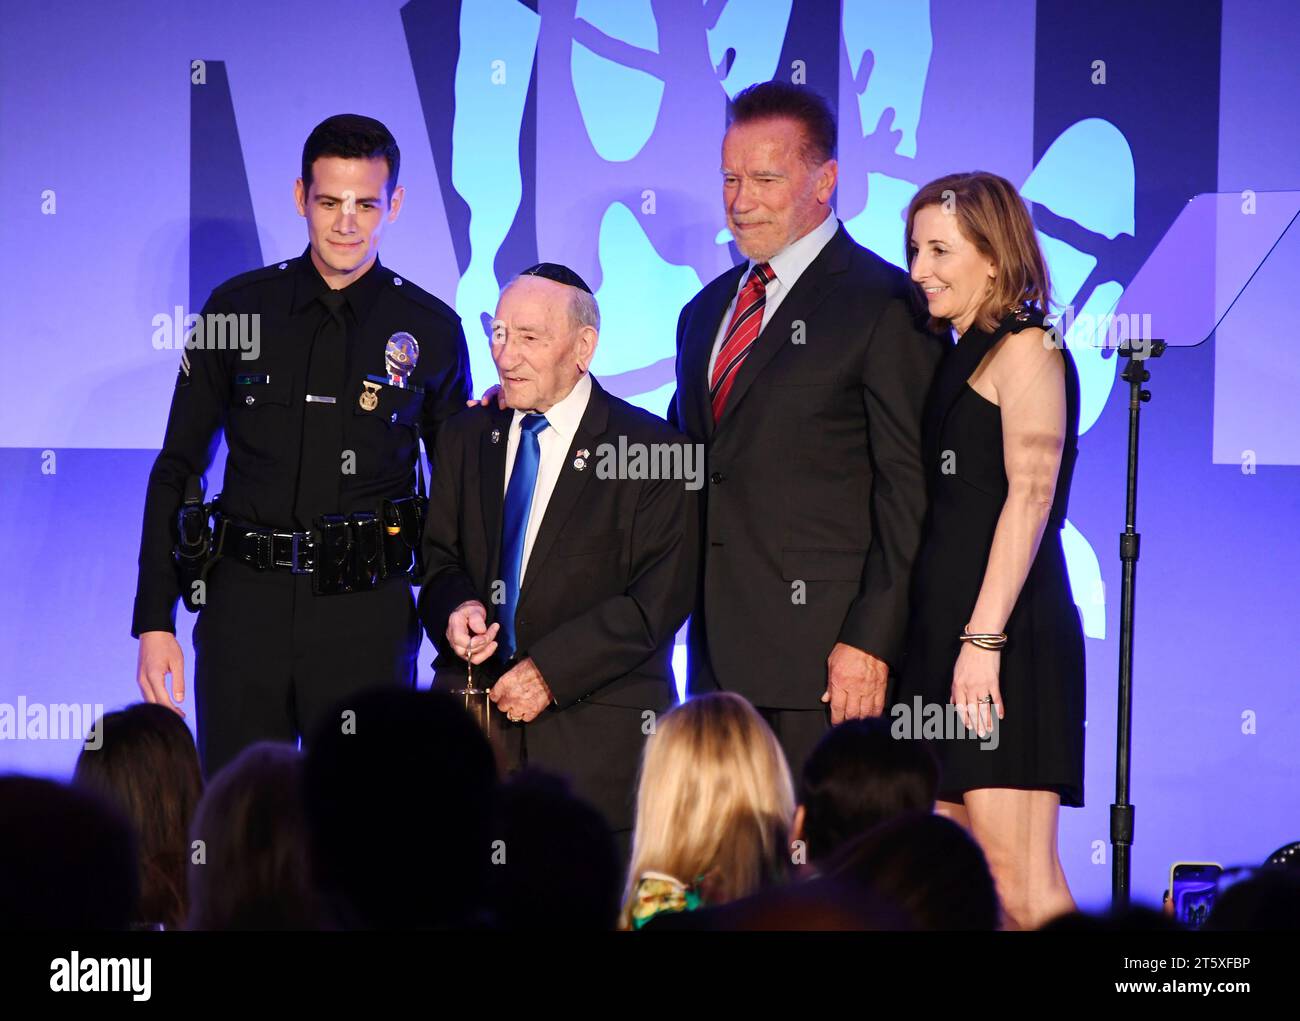 Beverly Hills, California, USA. 06th Nov, 2023. (L-R) LAPD's Gabe Kaplan, 101-year-old Holocaust survivor Joe Alexander, Arnold Schwarzenegger and Holocaust Museum LA CEO Beth Kean onstage during the Holocaust Museum LA gala after being honored with first Award of Courage at The Beverly Hills Hotel on November 06, 2023 in Beverly Hills, California. Credit: Jeffrey Mayer/Jtm Photos/Media Punch/Alamy Live News Stock Photo